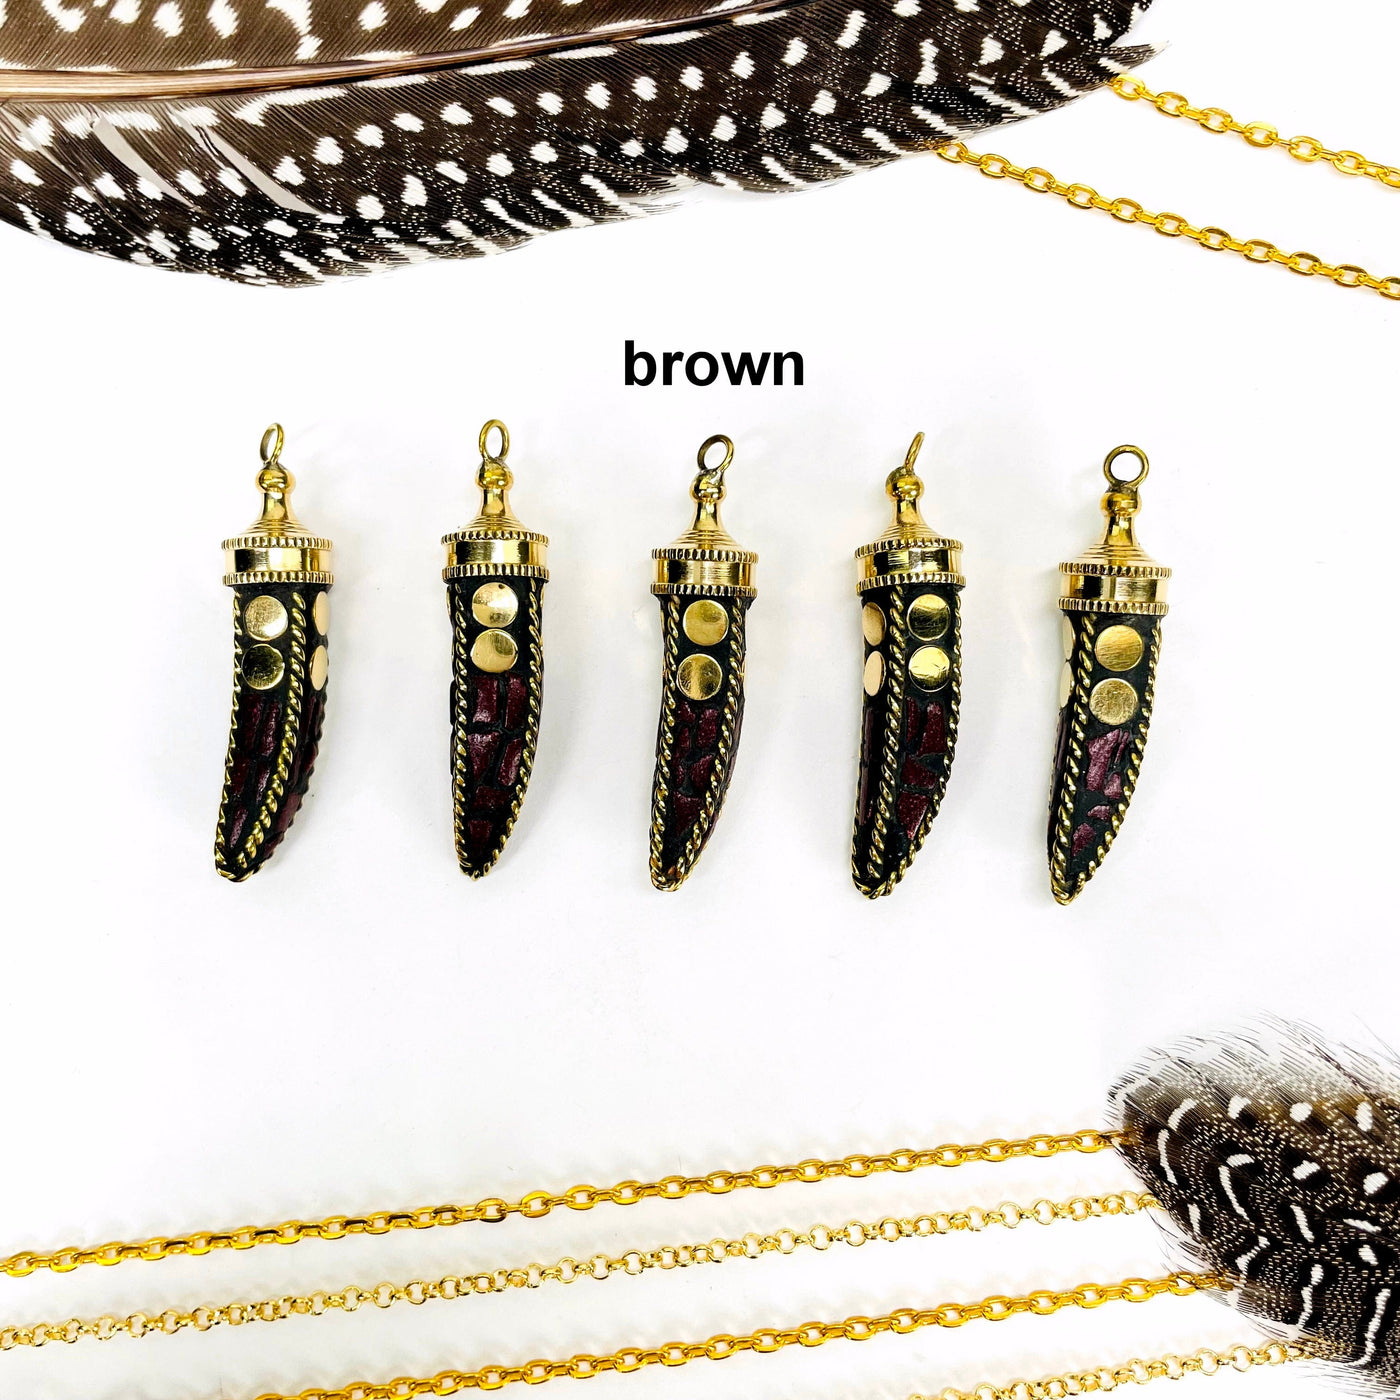 overhead view of five brown petite mosaic horn pendants in a row on white background with decorations for possible variations